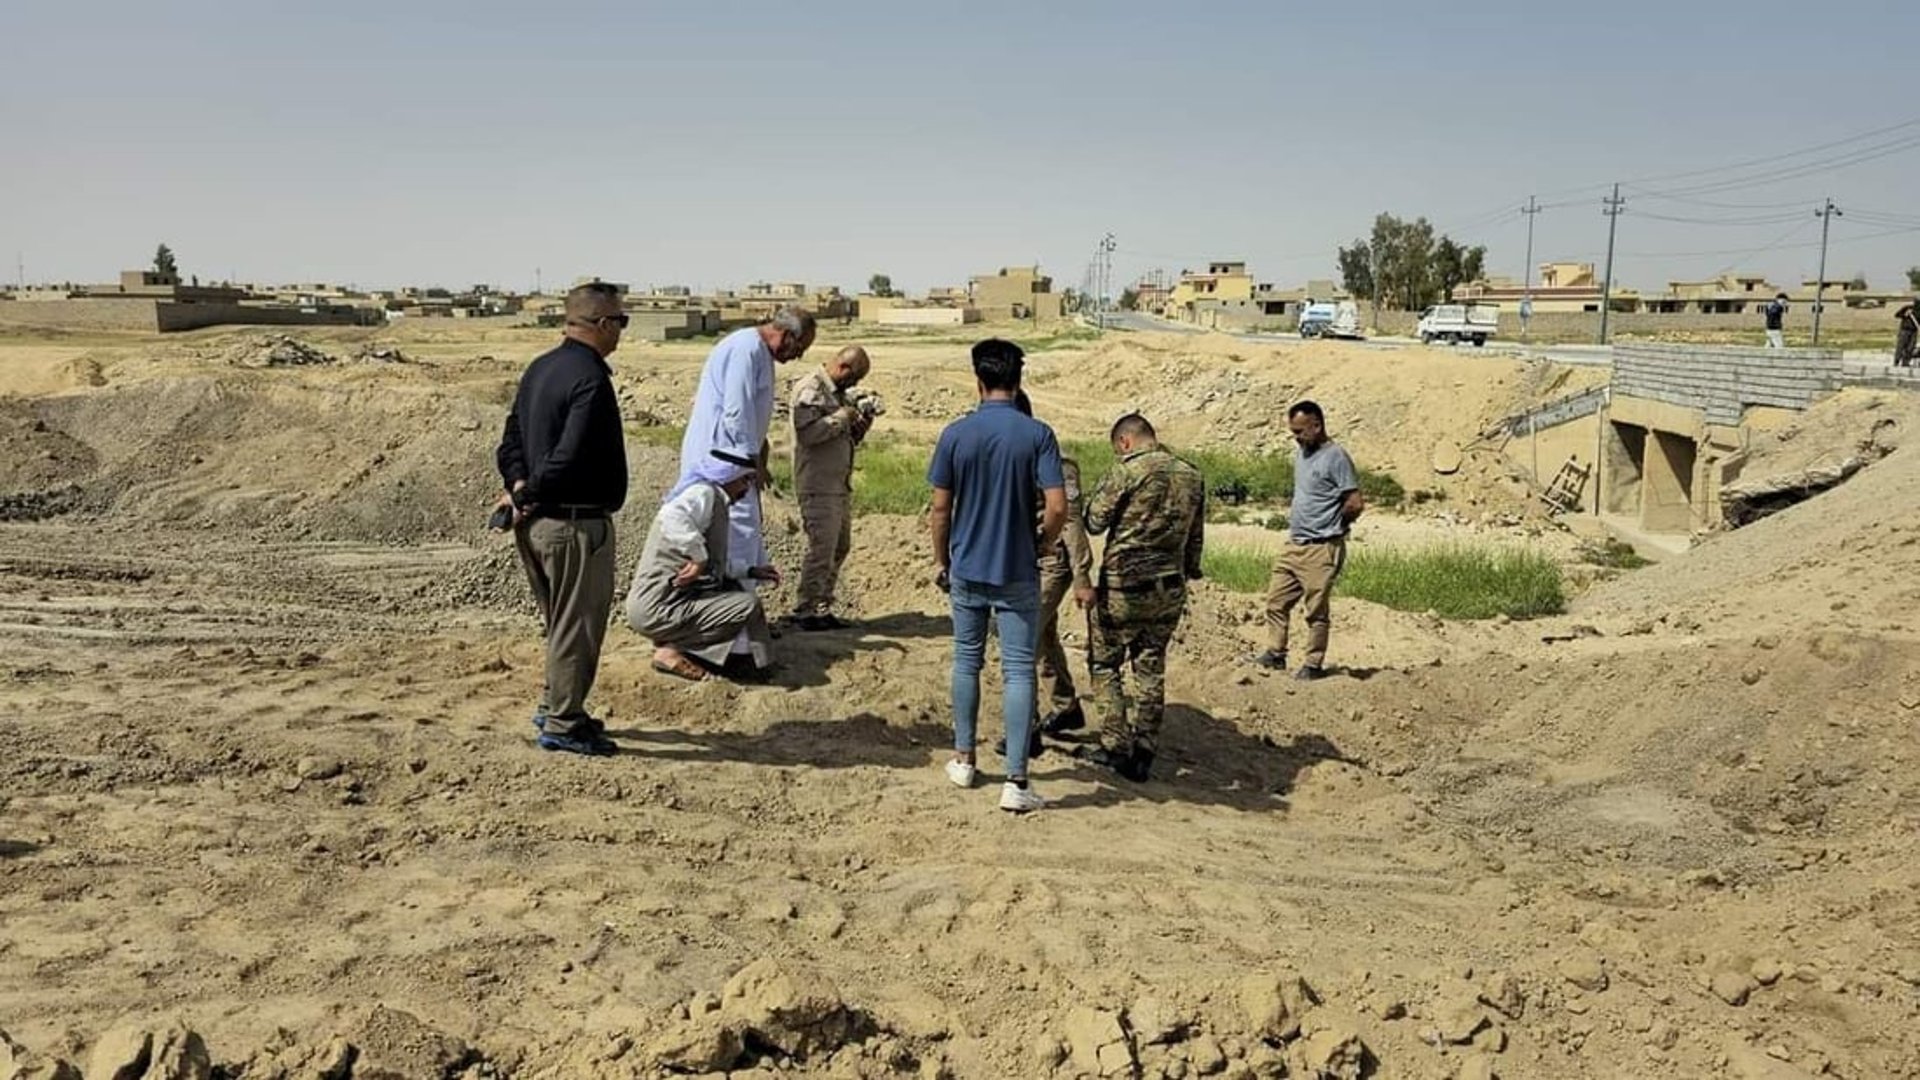 Senior officials concerned about decision to arm residents in Iraqs Nineveh